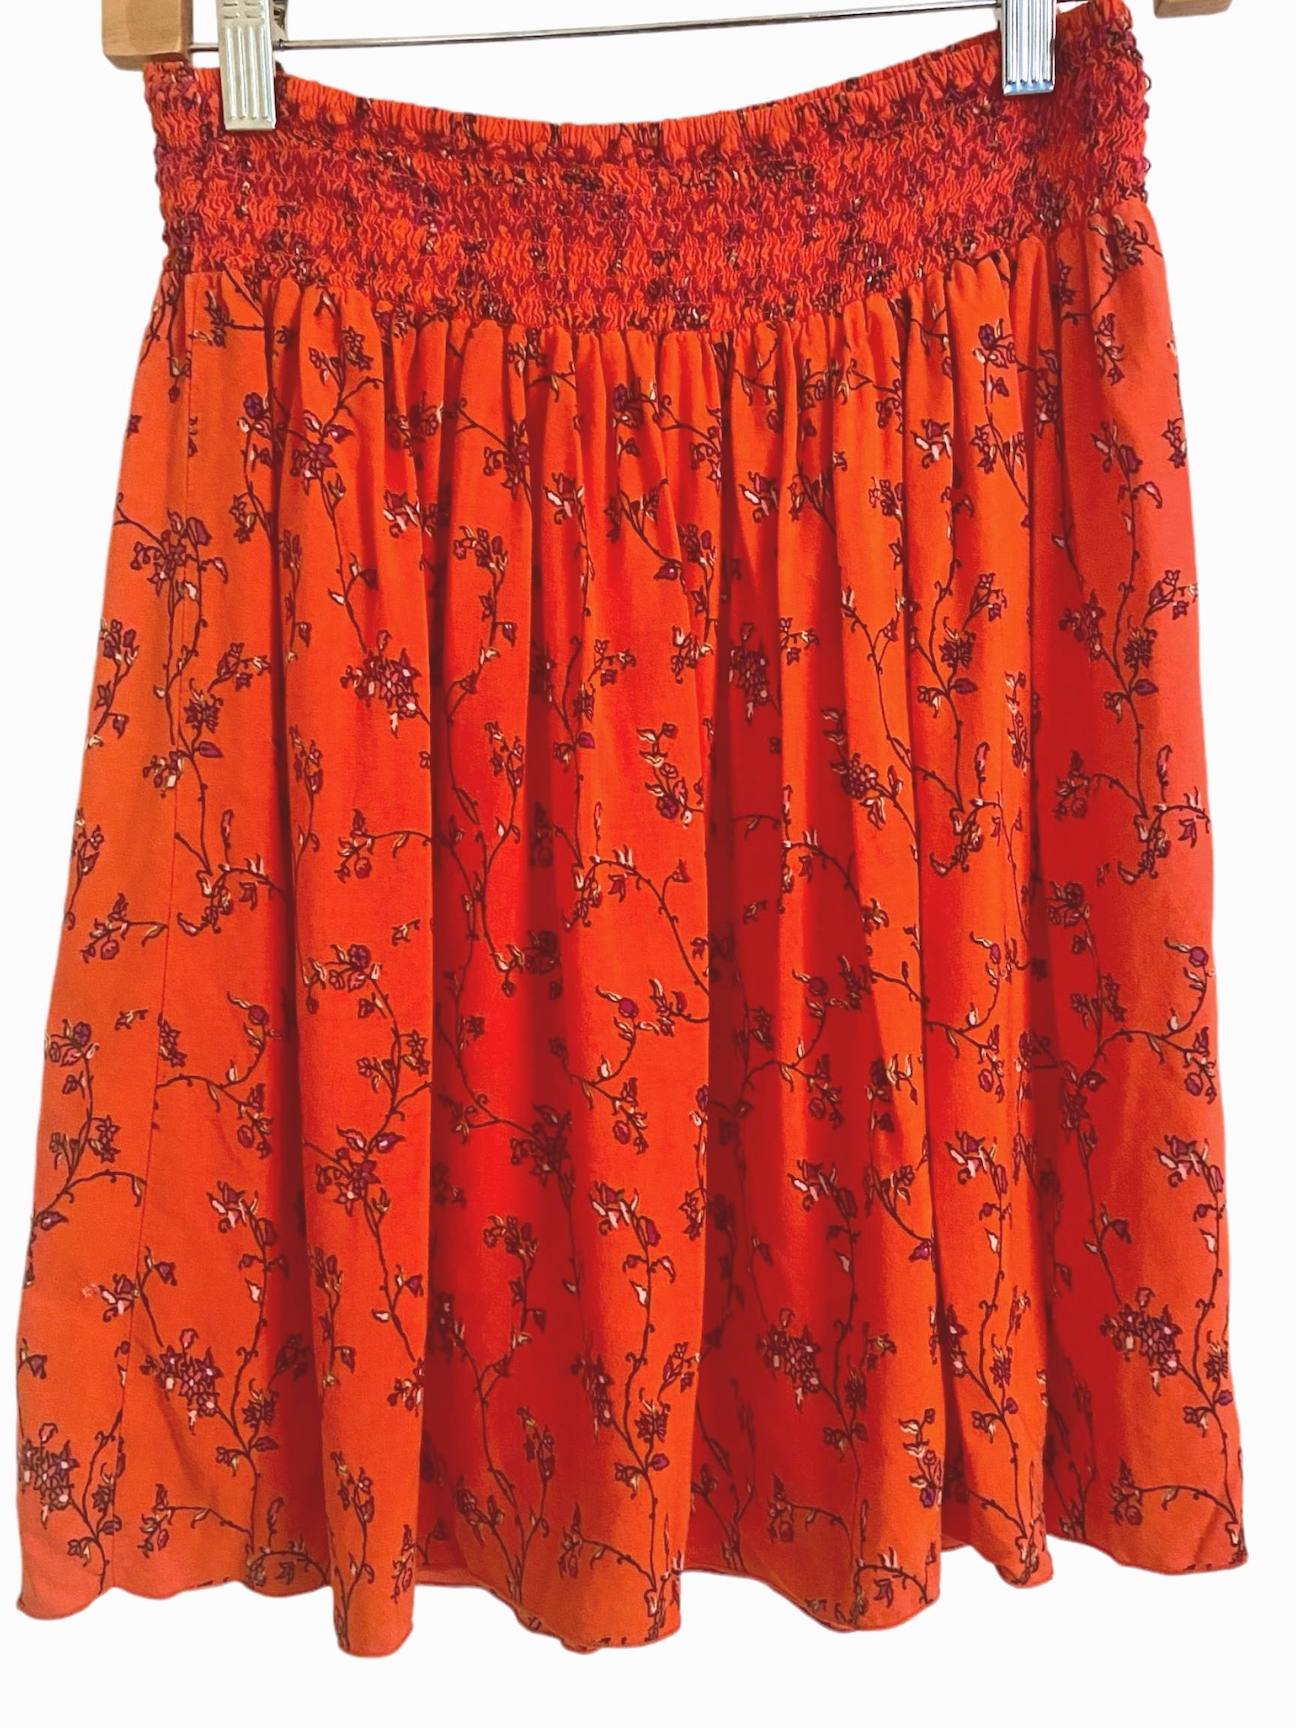 Bright Winter OLD NAVY floral print skirt